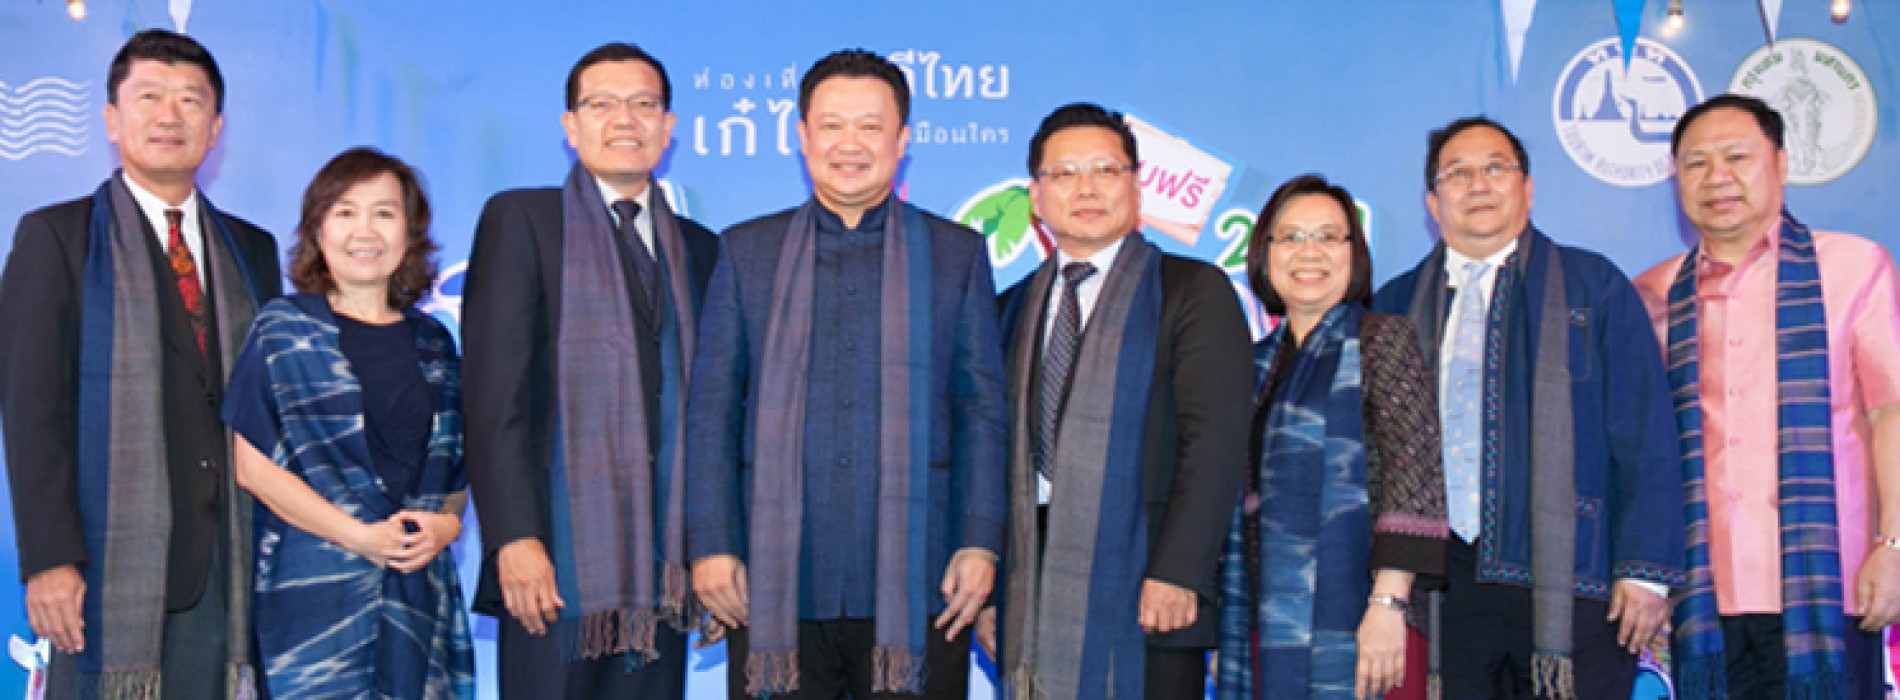 TAT spotlights the essence of Thainess with Thailand Tourism Festival 2016